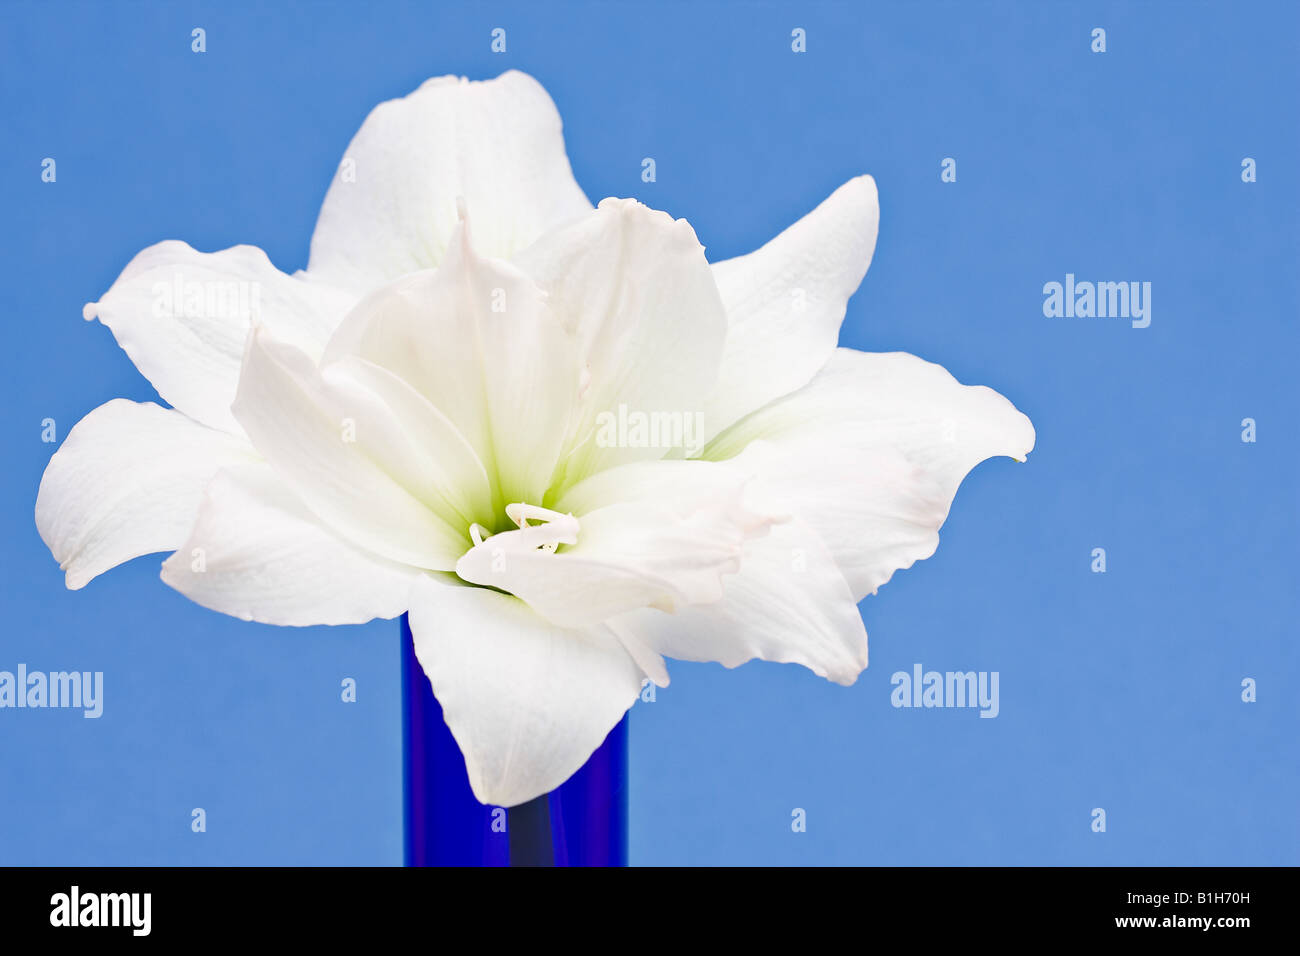 Close up of a Double Amaryllis flower 'White Nymph' against a blue background Stock Photo